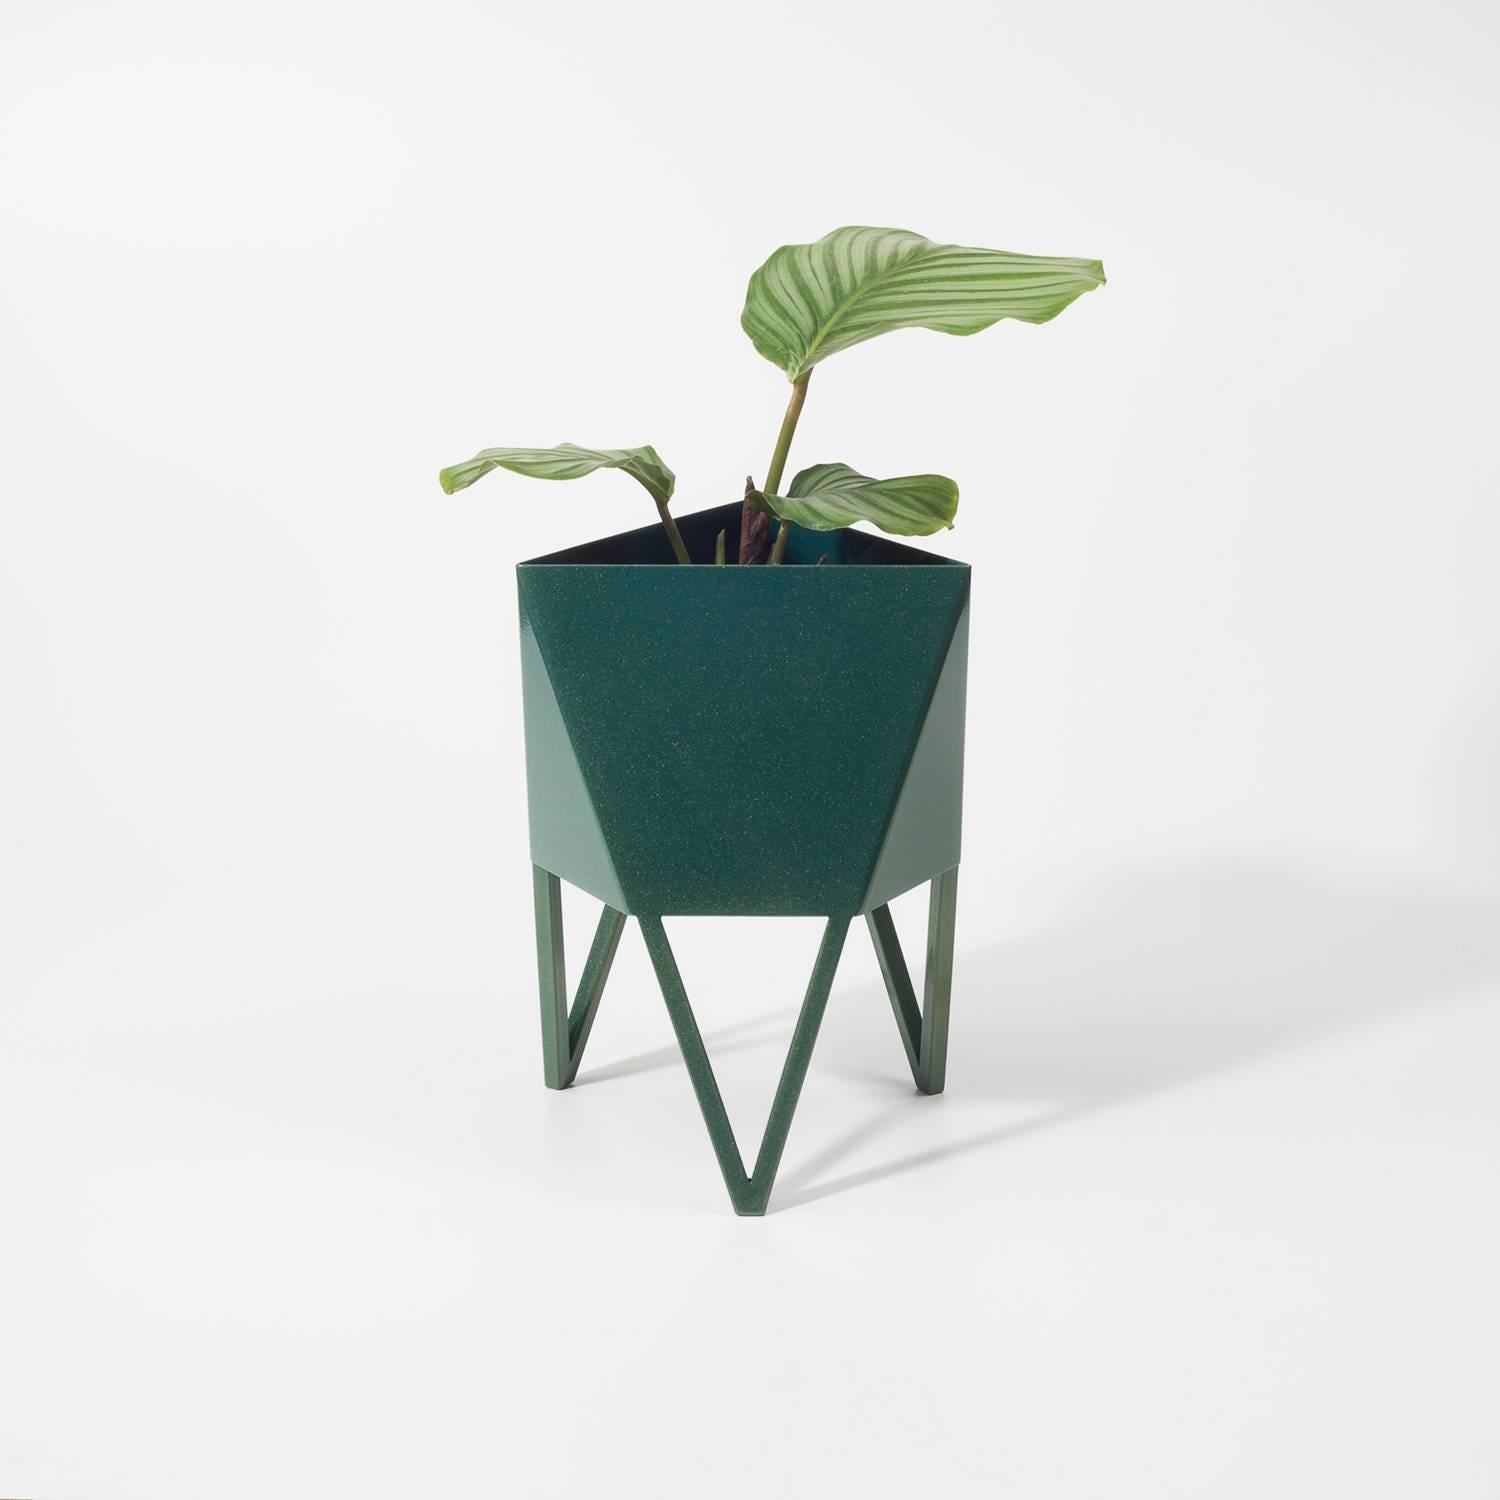 Deca Planter in Glossy White Steel, Medium, by Force/Collide 2